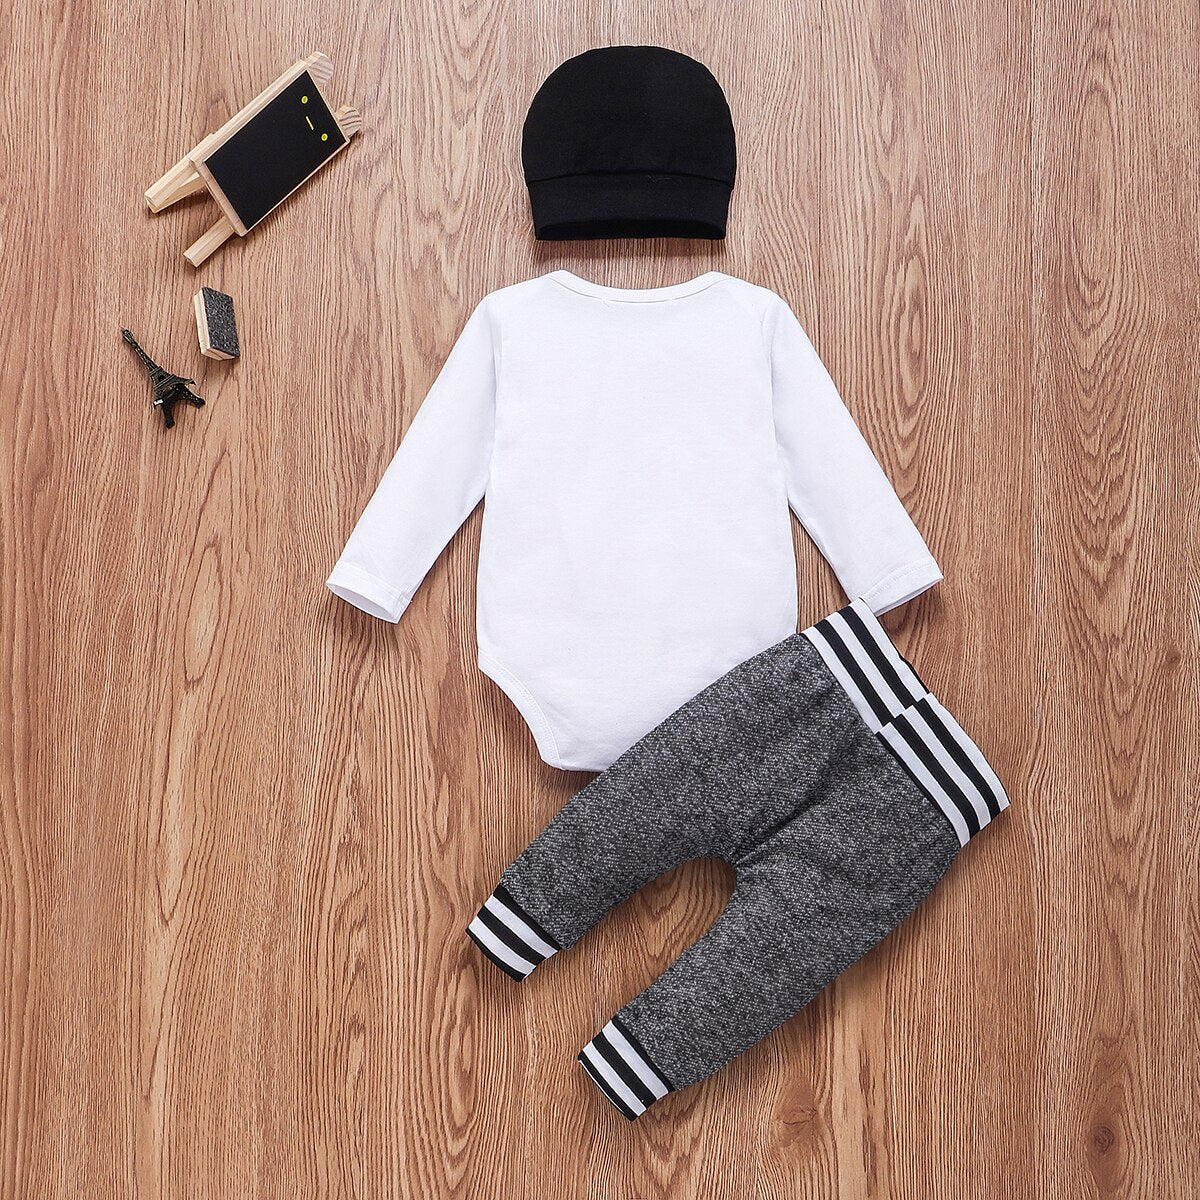 Newborn Infant Baby Boy Clothes Cotton Sets Long Sleeve Romper Pant Hats Outfit 3Pcs Baby Warm Clothing